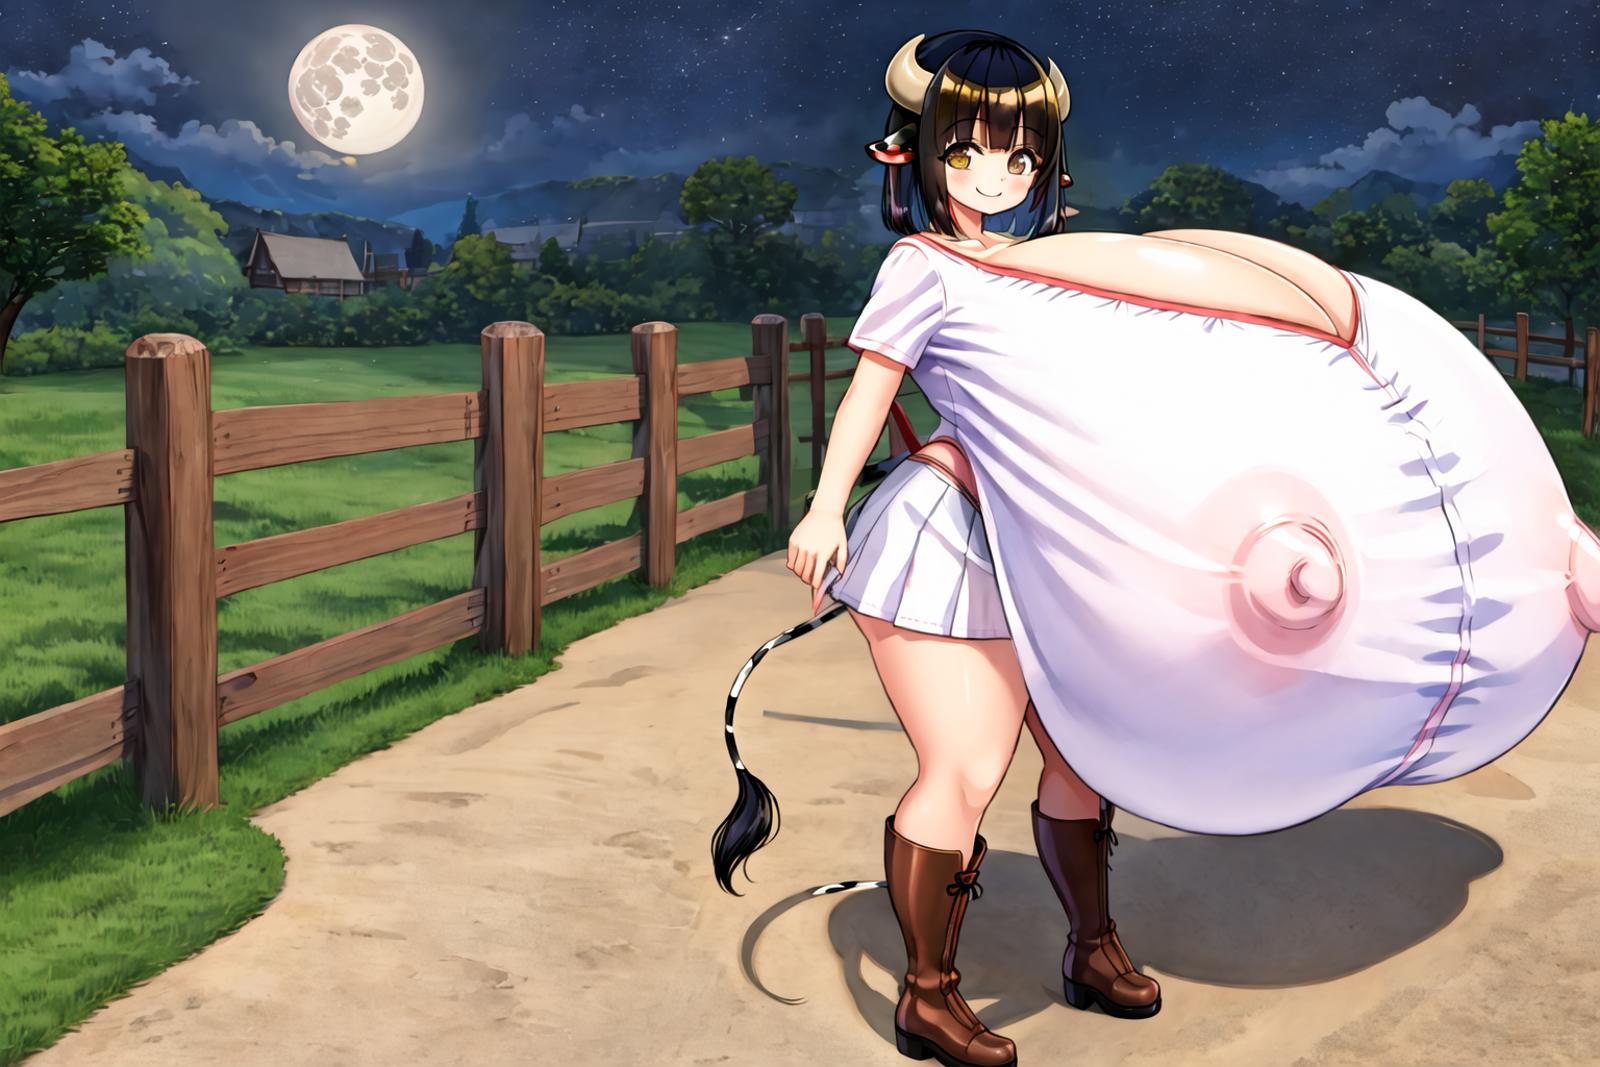 Cow Maiden, maoyuu maou yuusha (Beta) image by rulles